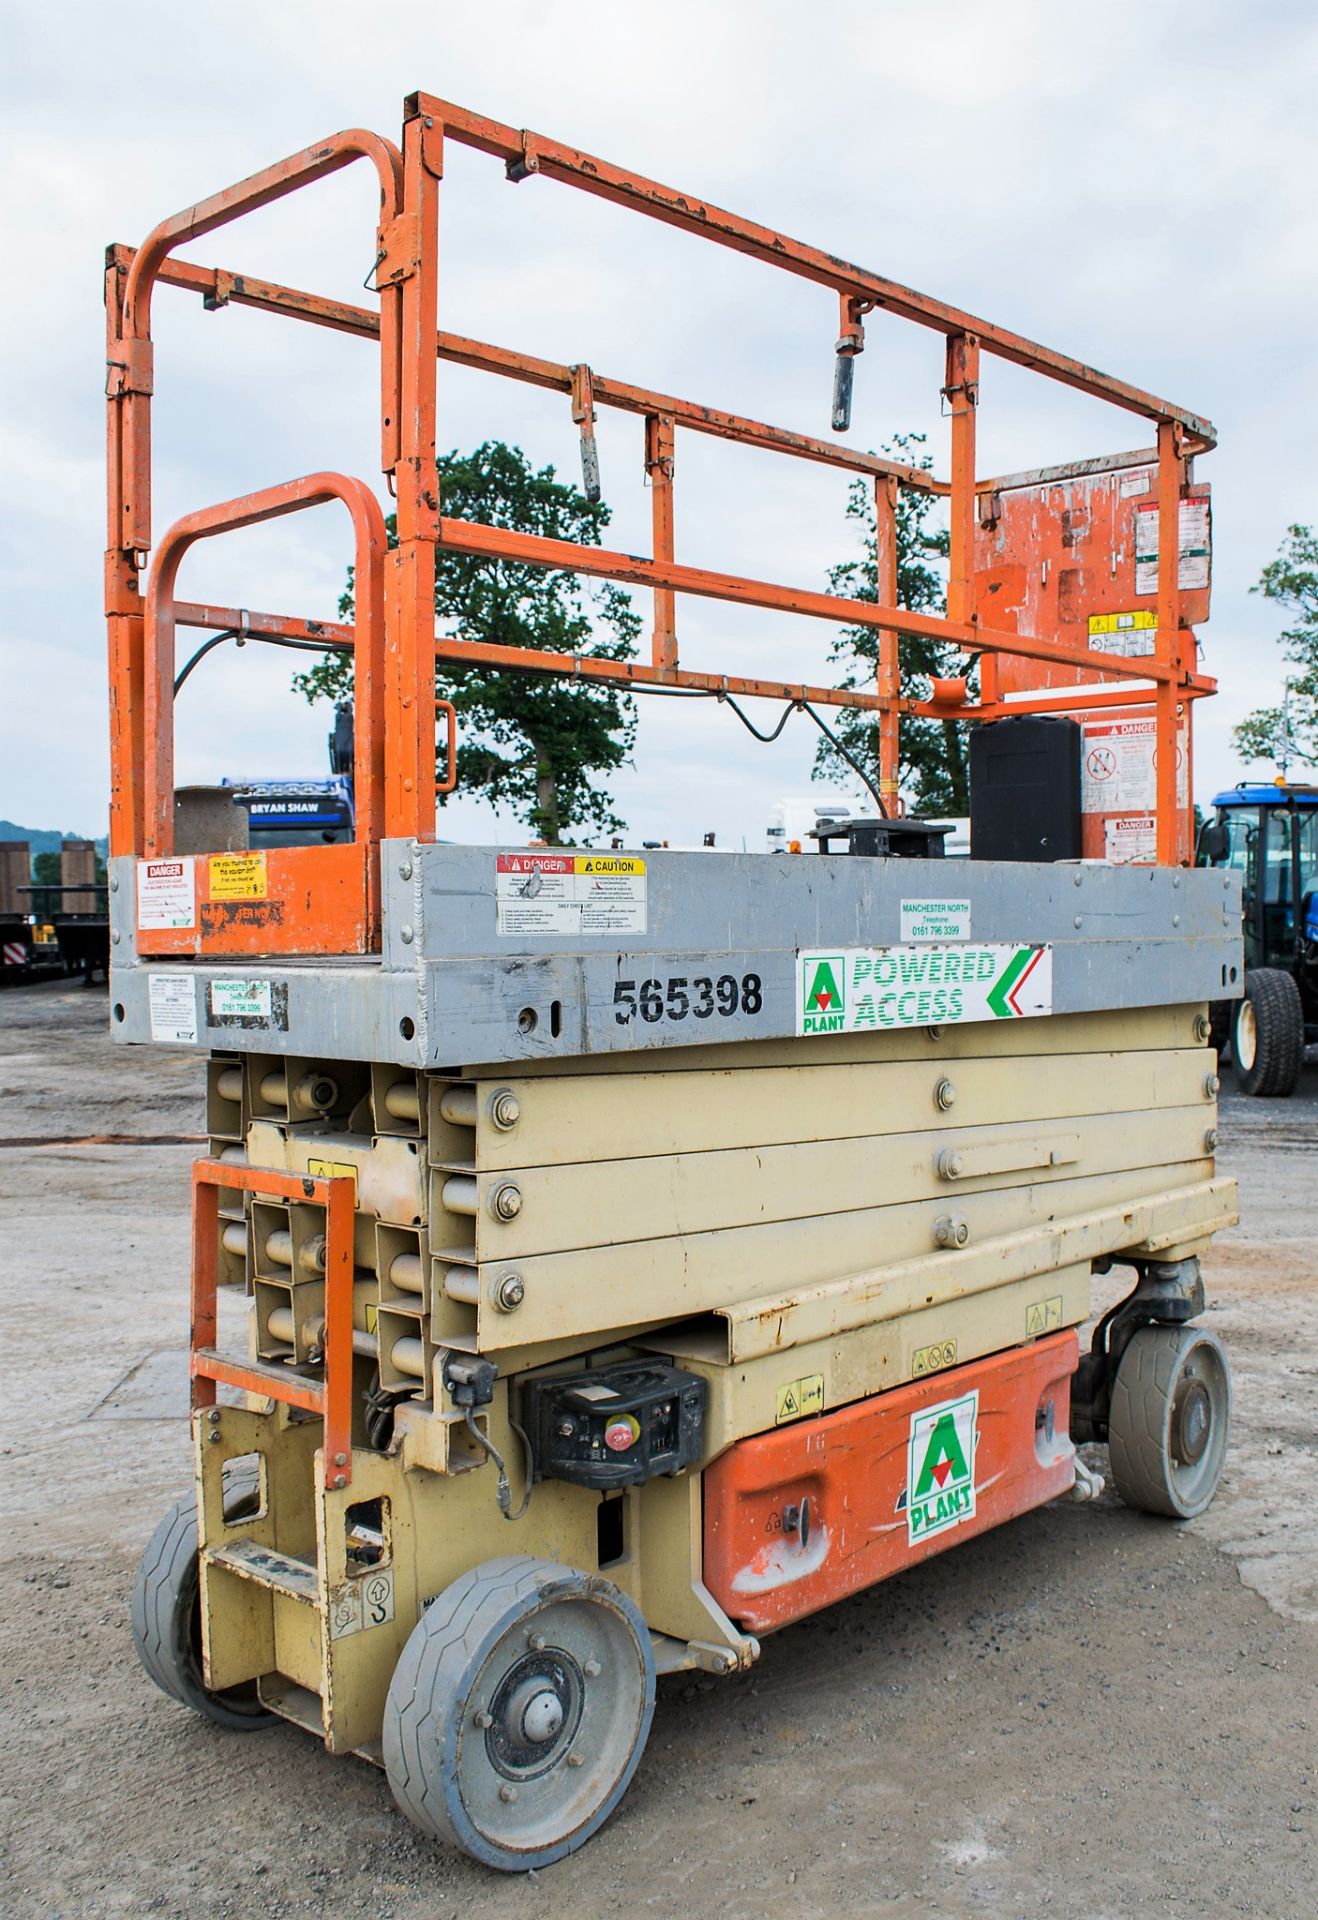 JLG 2630 26 ft battery electric scissor lift access platform Year: 2011 S/N: 1940 A565398 ** - Image 3 of 7